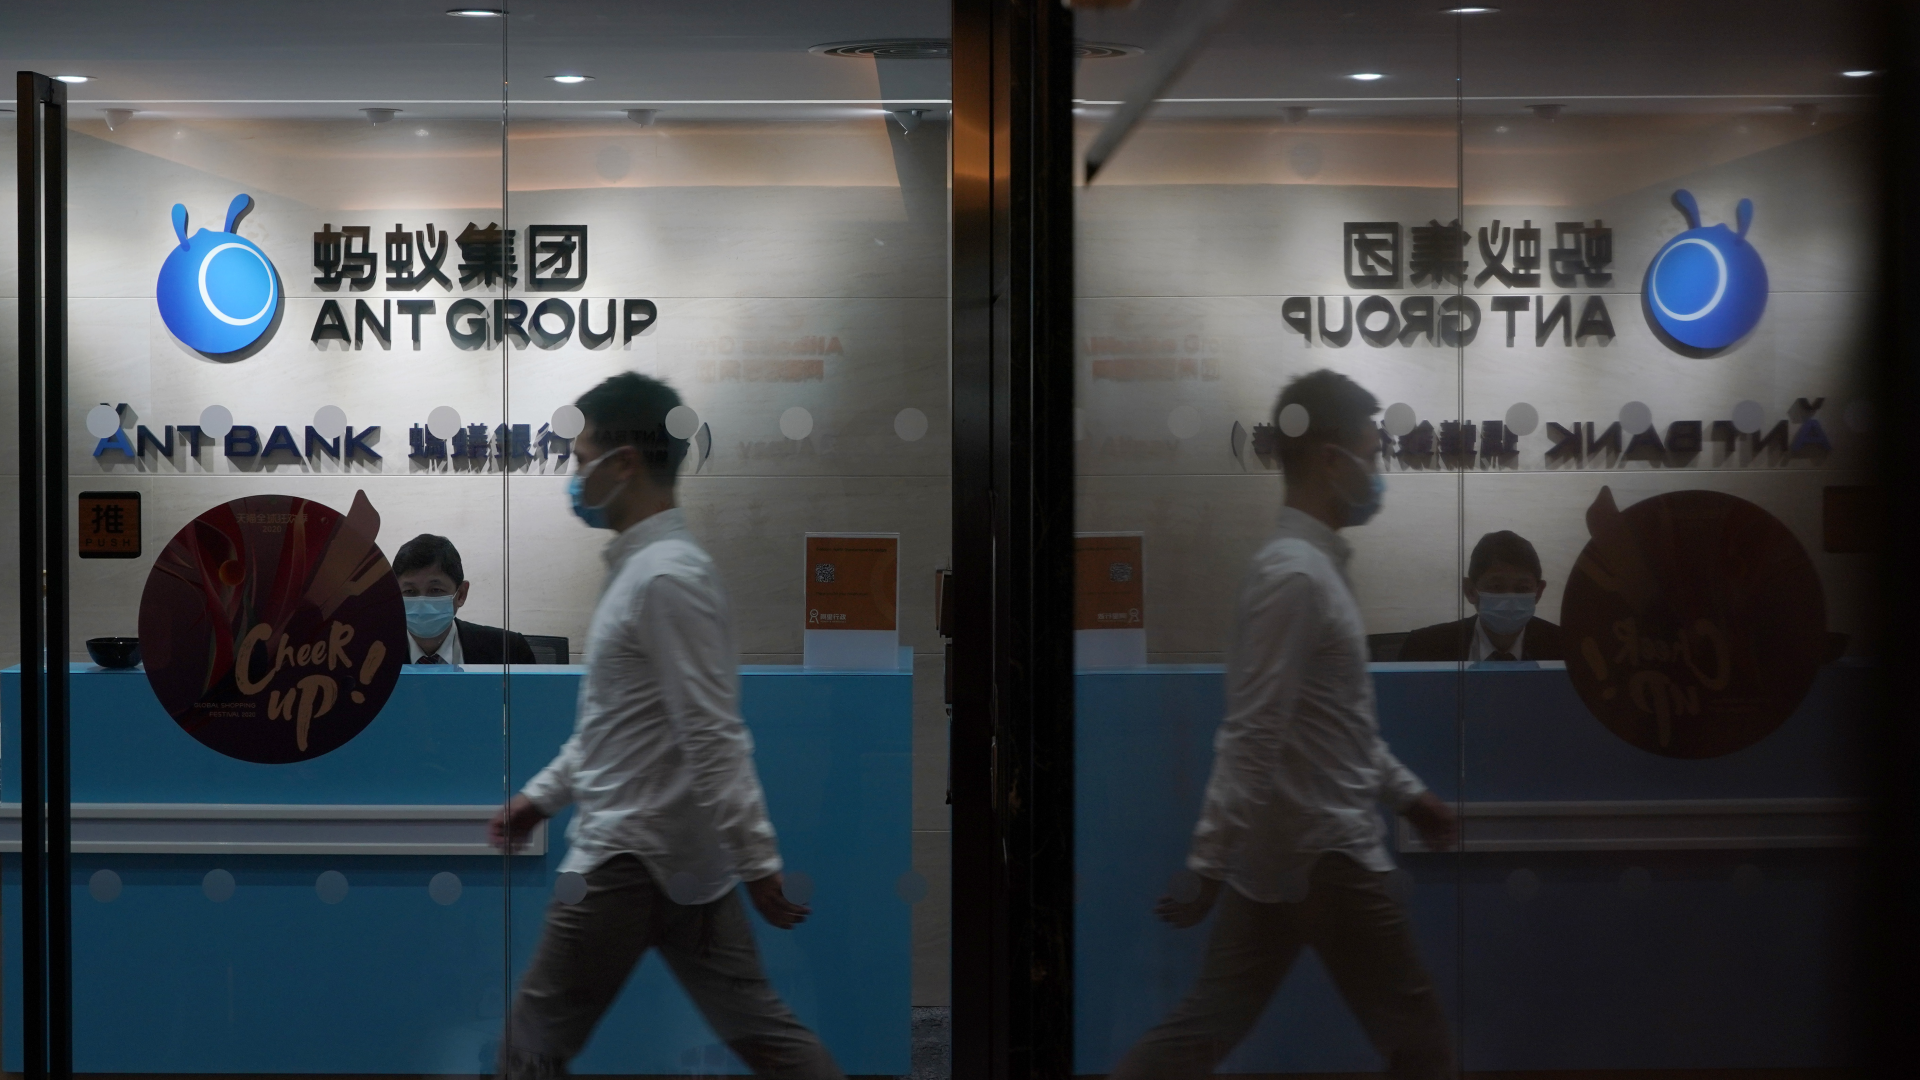 Das Ant Group Büro in Hong Kong | Foto: picture alliance / AP Photo